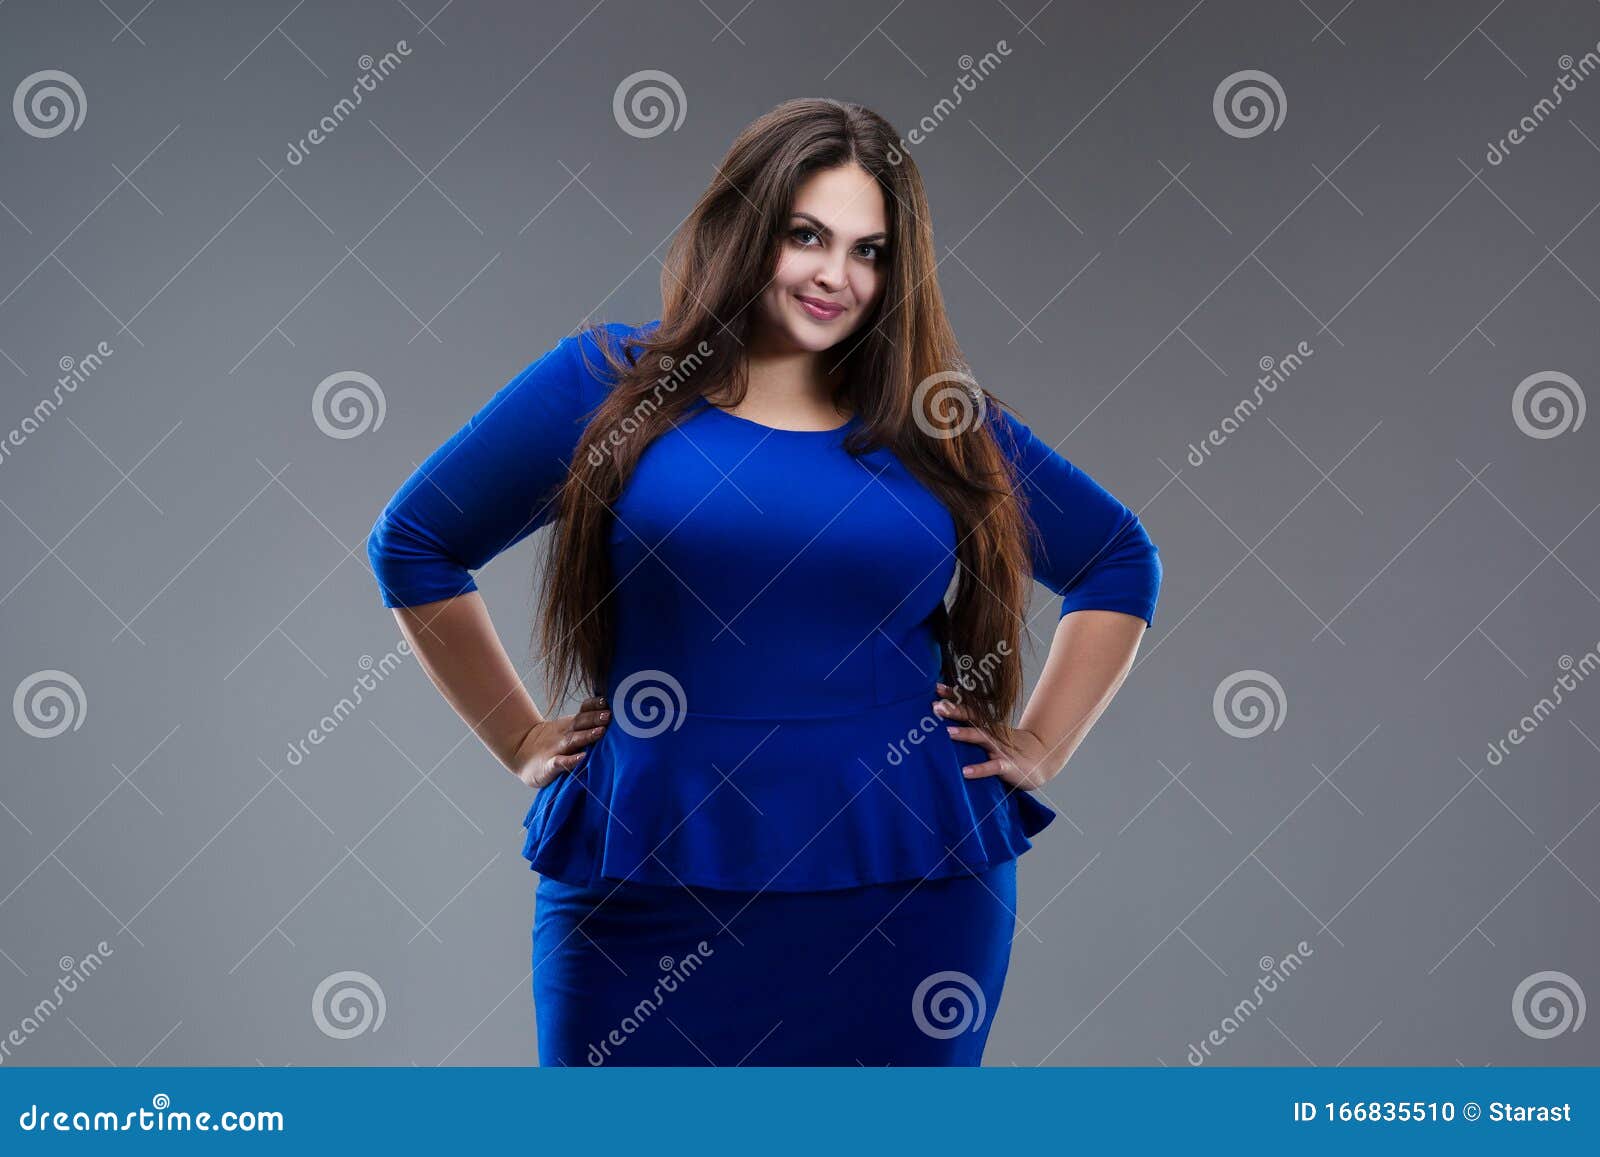 Happy Plus Size Model in Blue Dress, Fat Woman with Long Hair on Gray ...